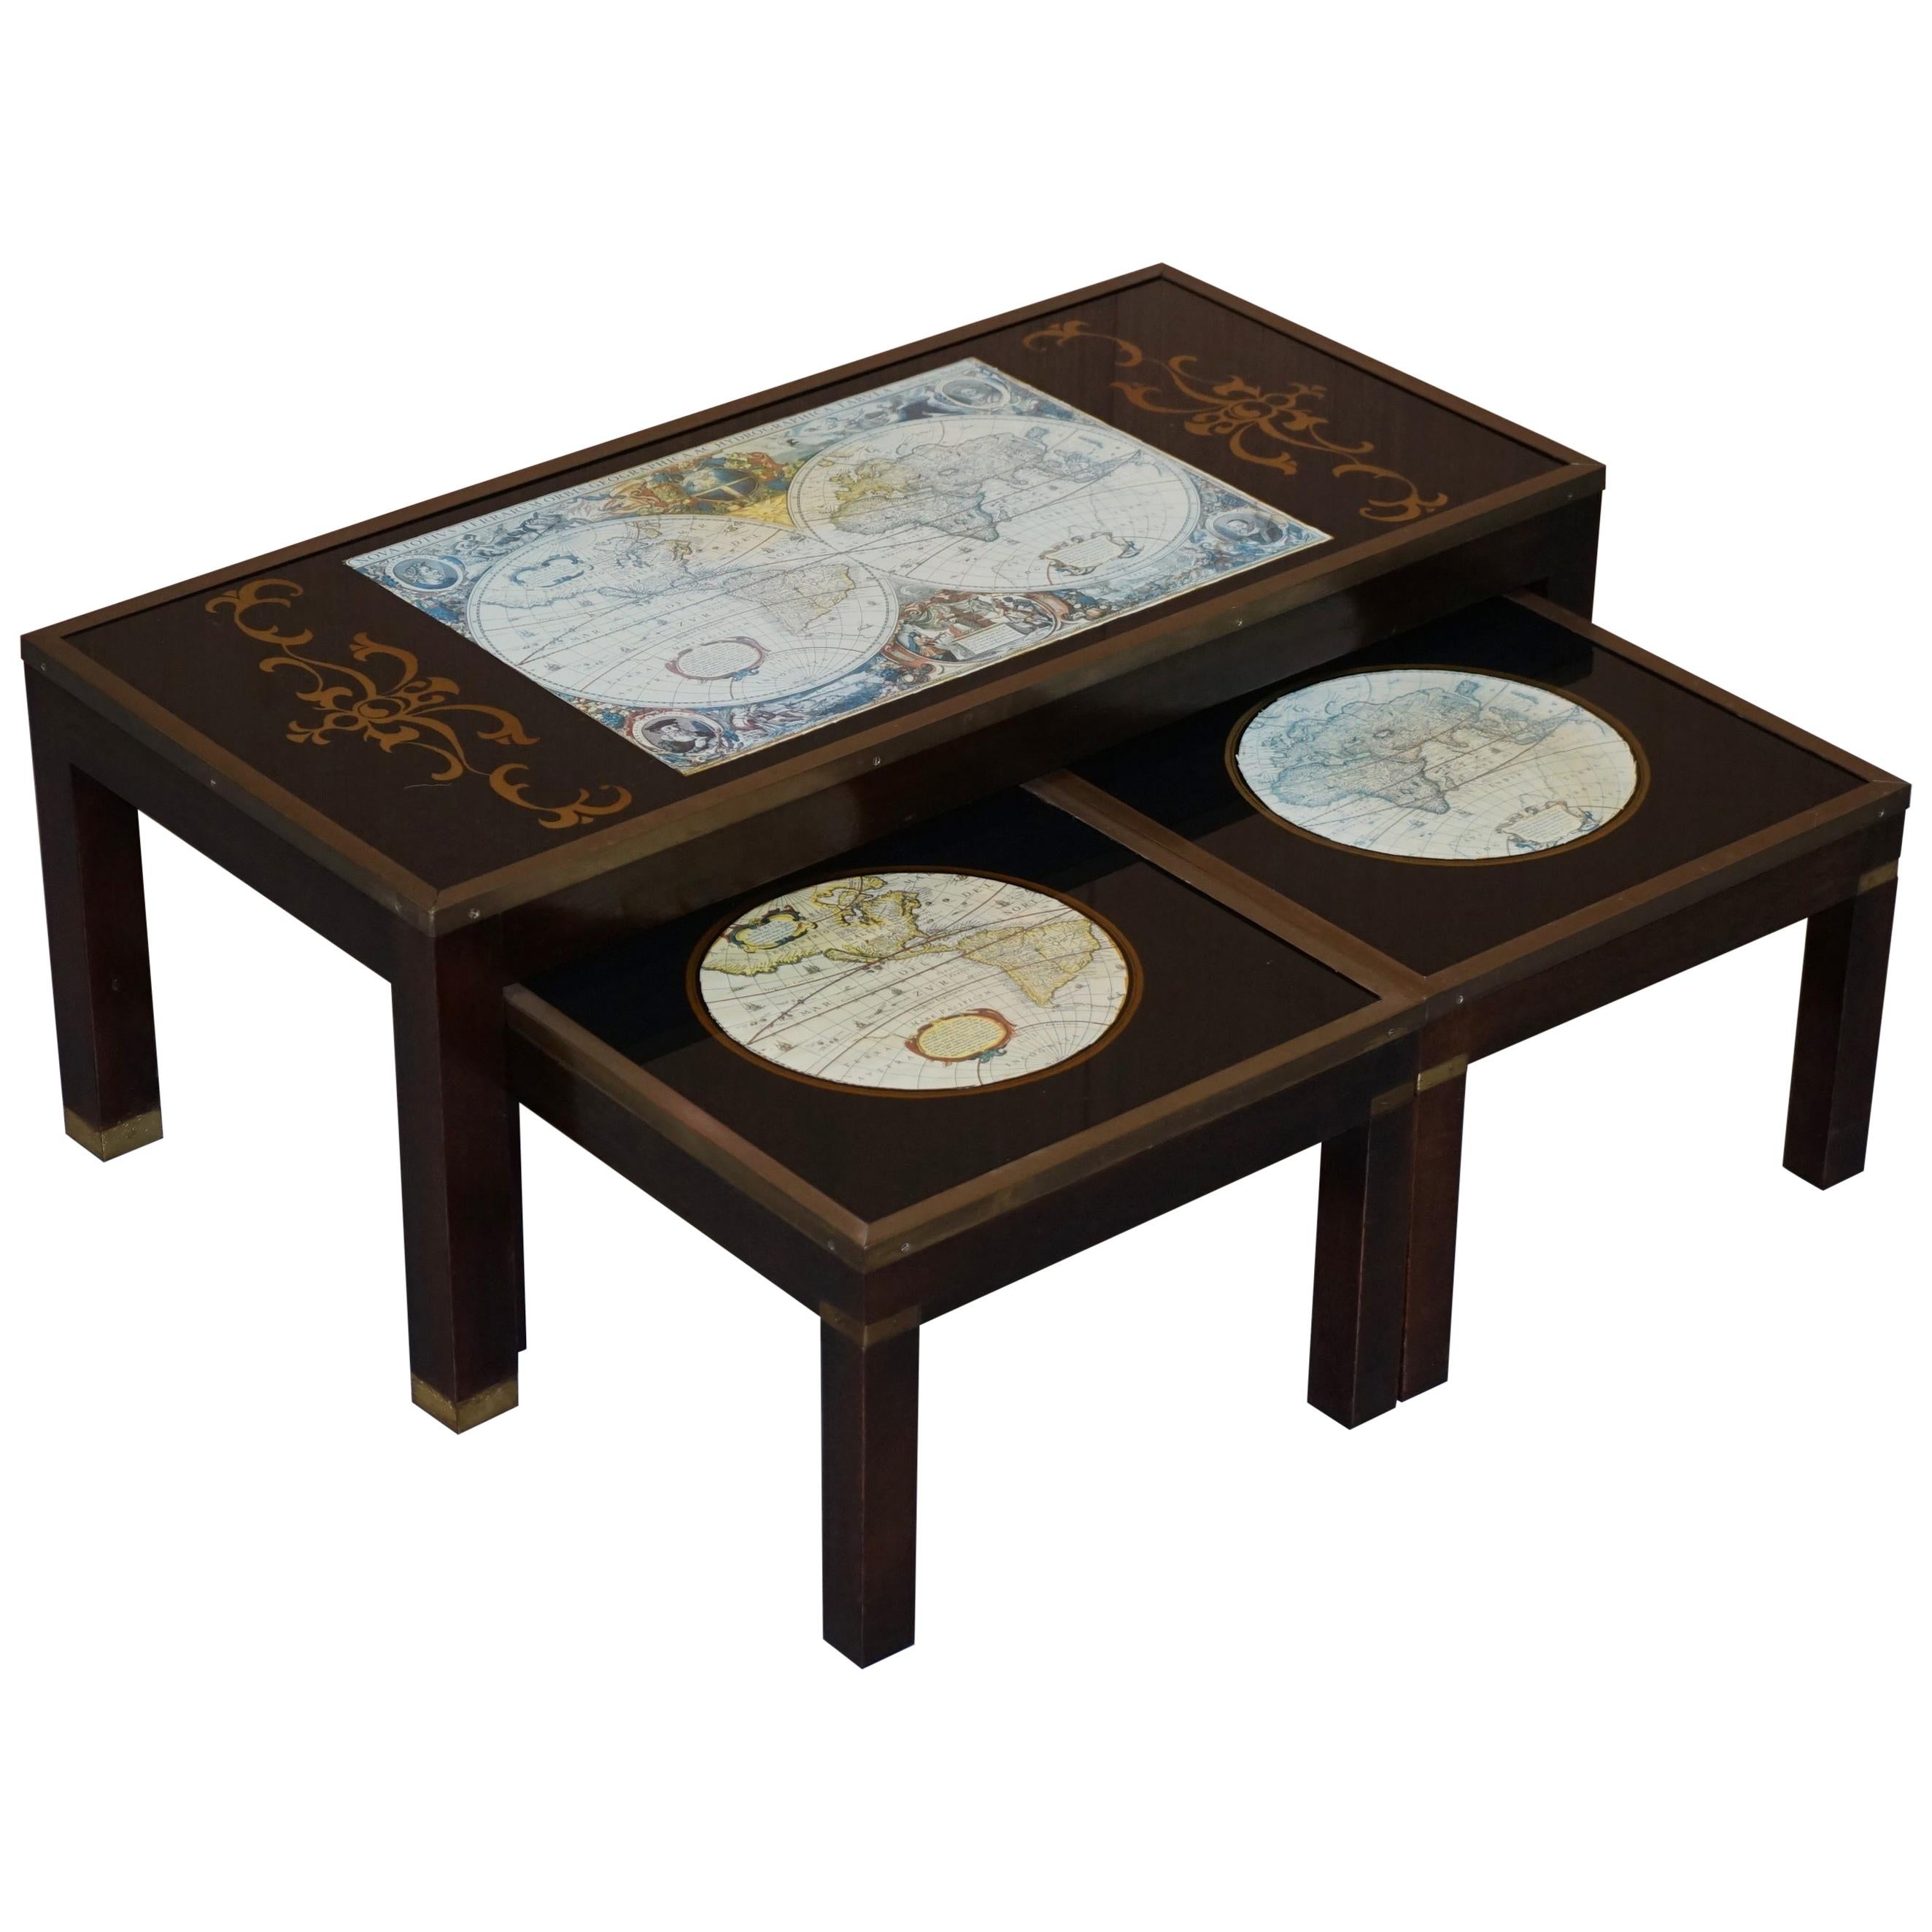 Stunning Coffee and Side Table Nest of Tables Military Campaign with World Maps